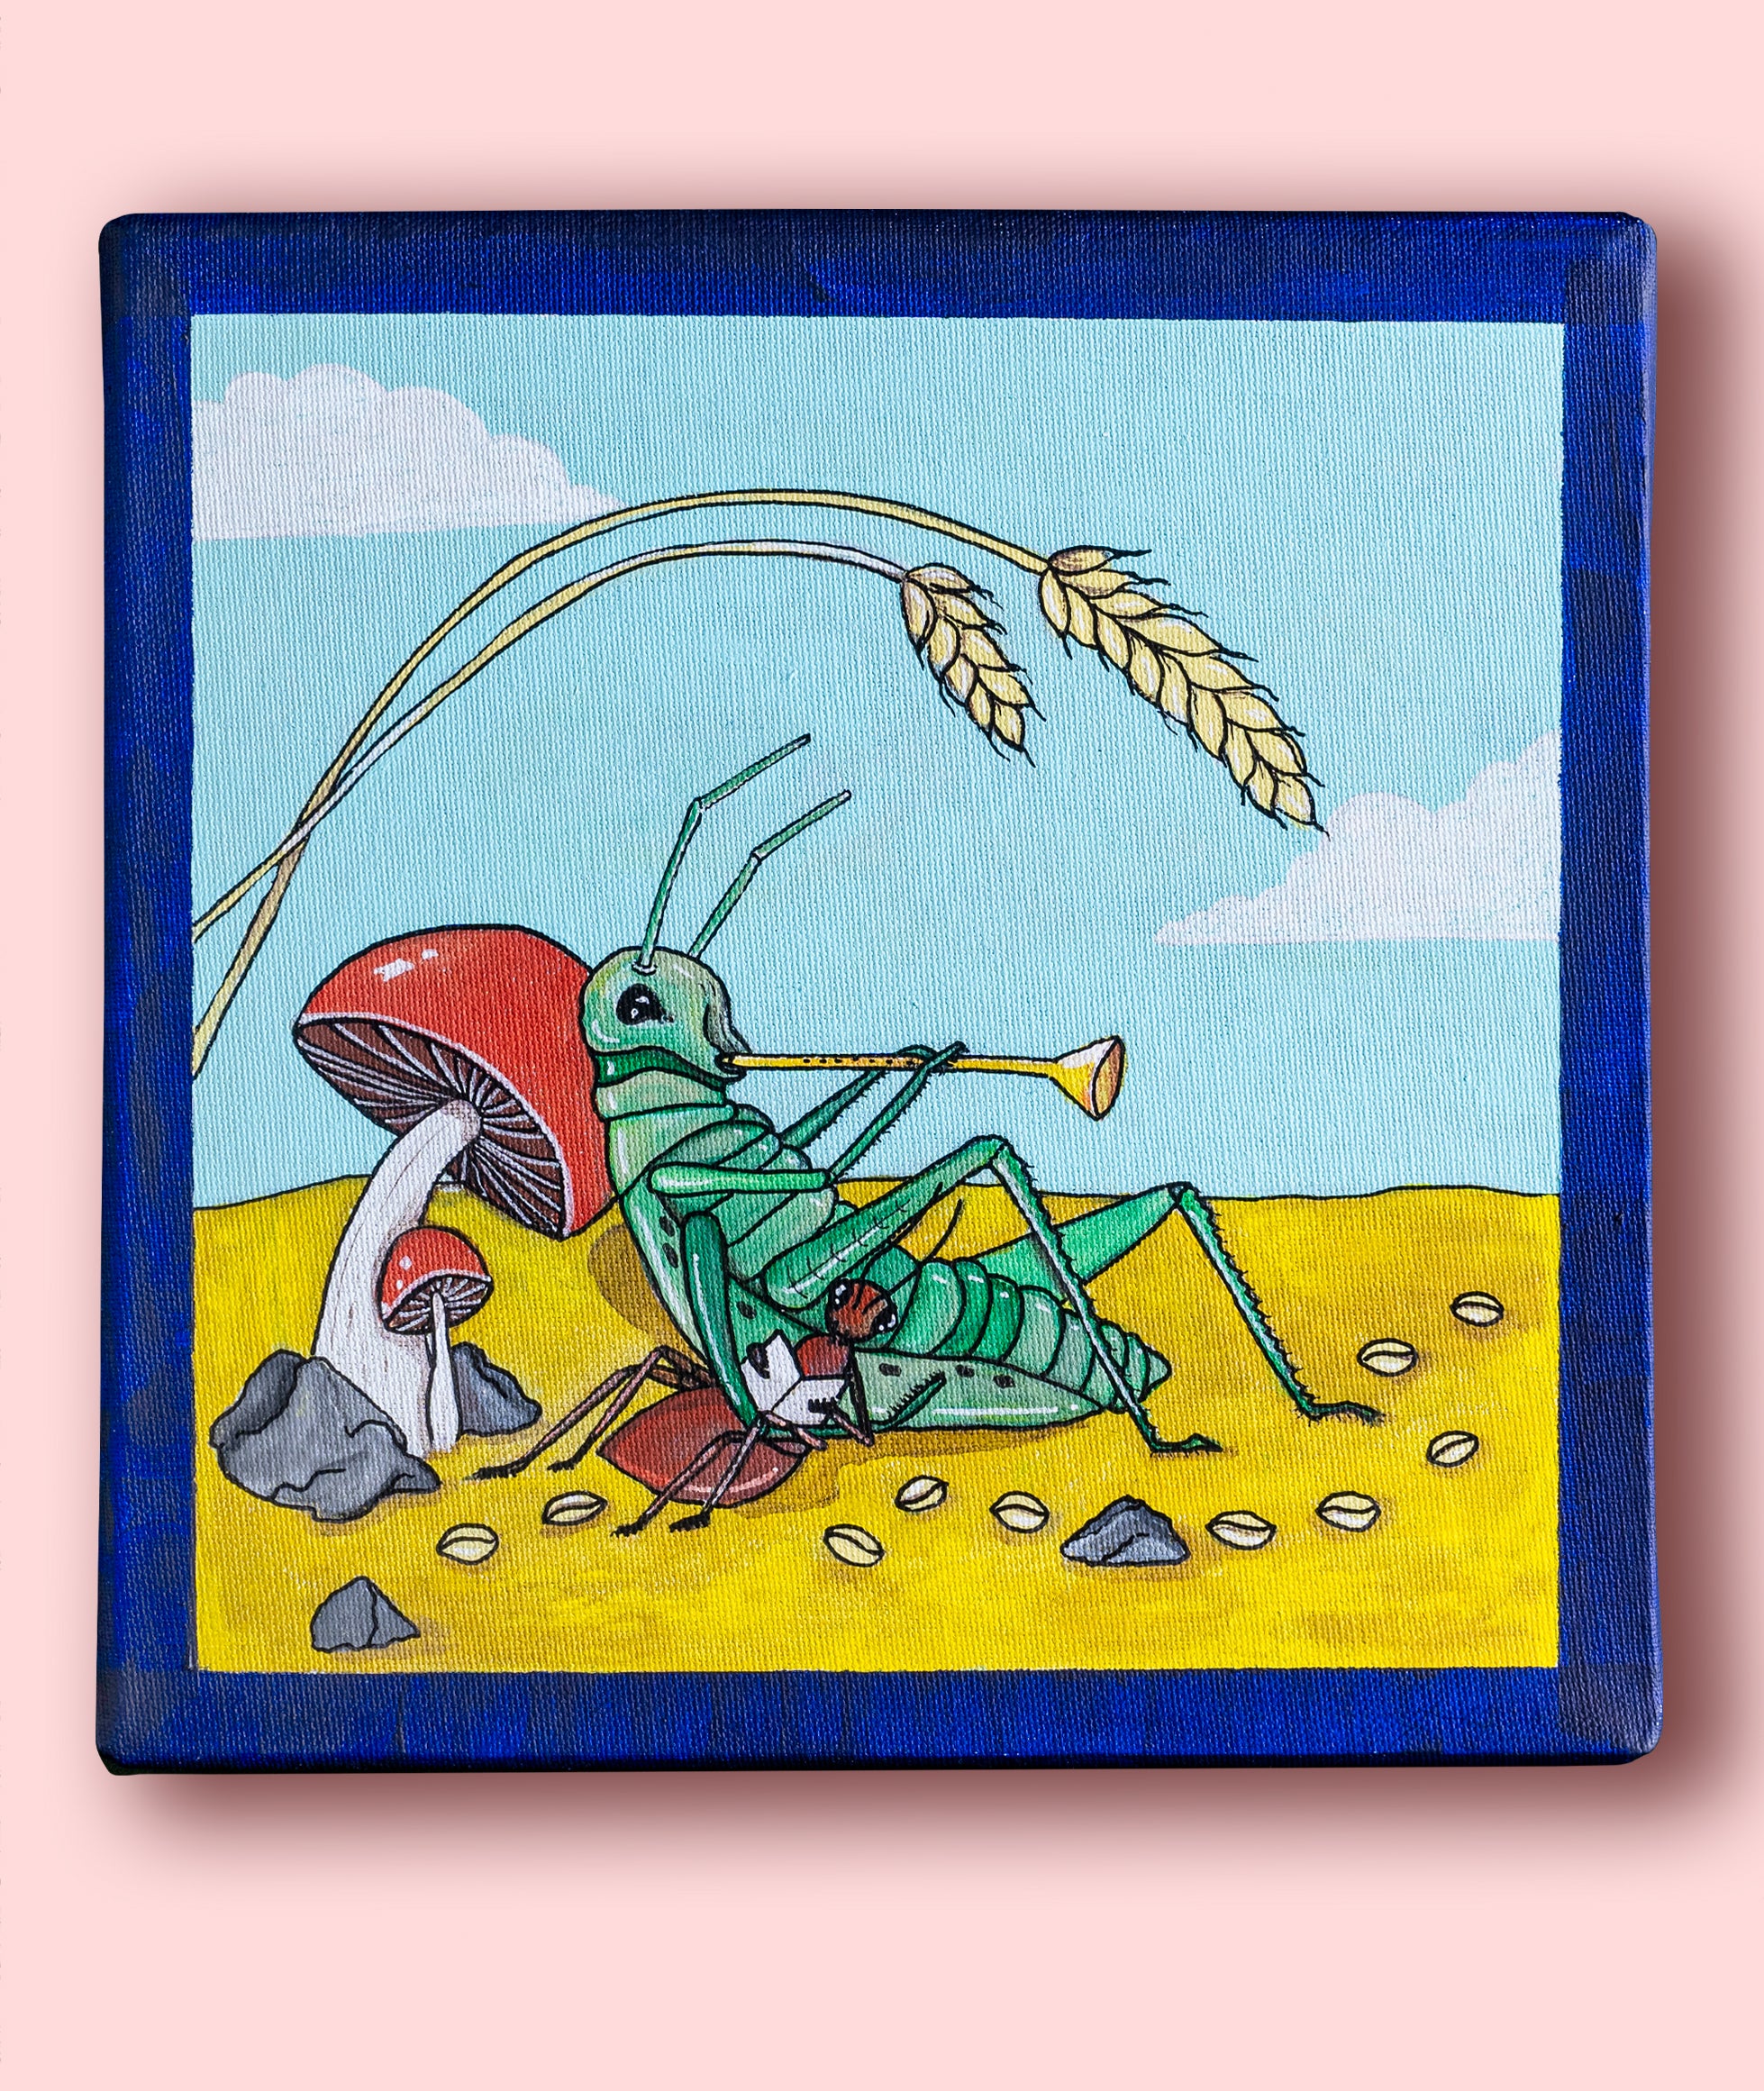 “The Ant and the Grasshopper”